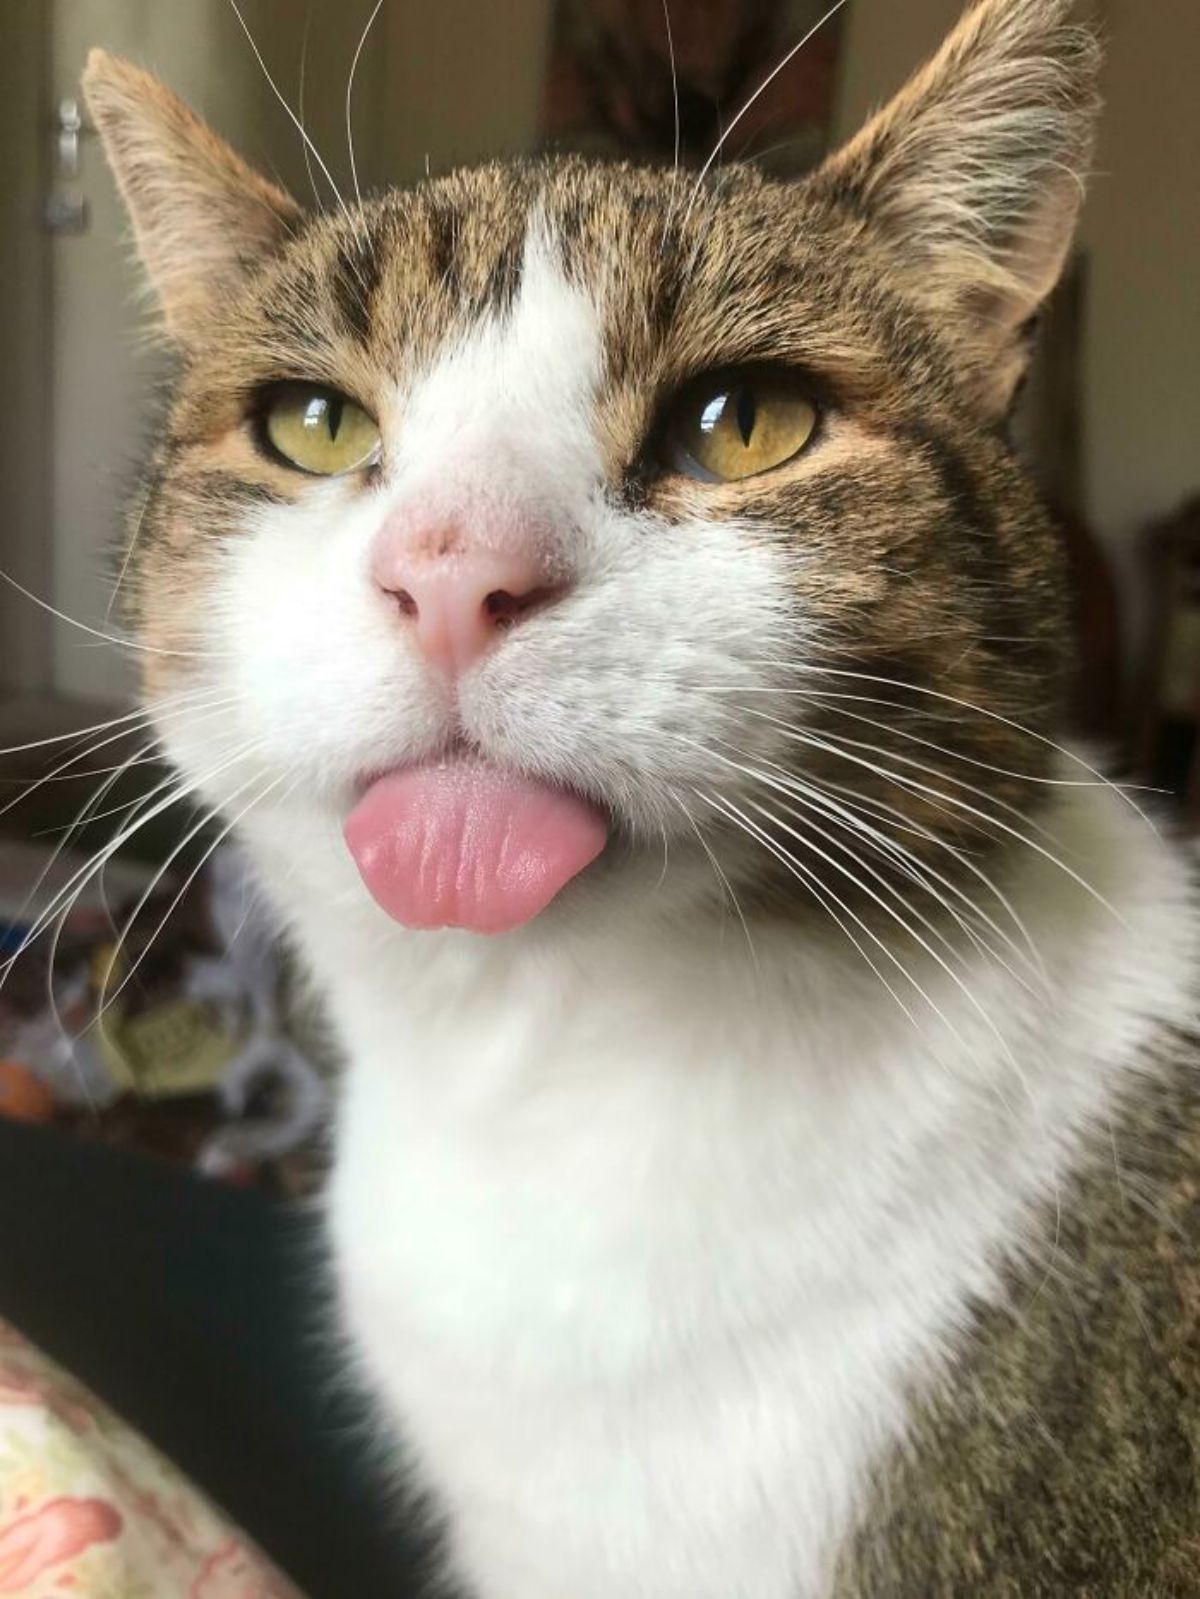 brown and white tabby cat with the tongue sticking out